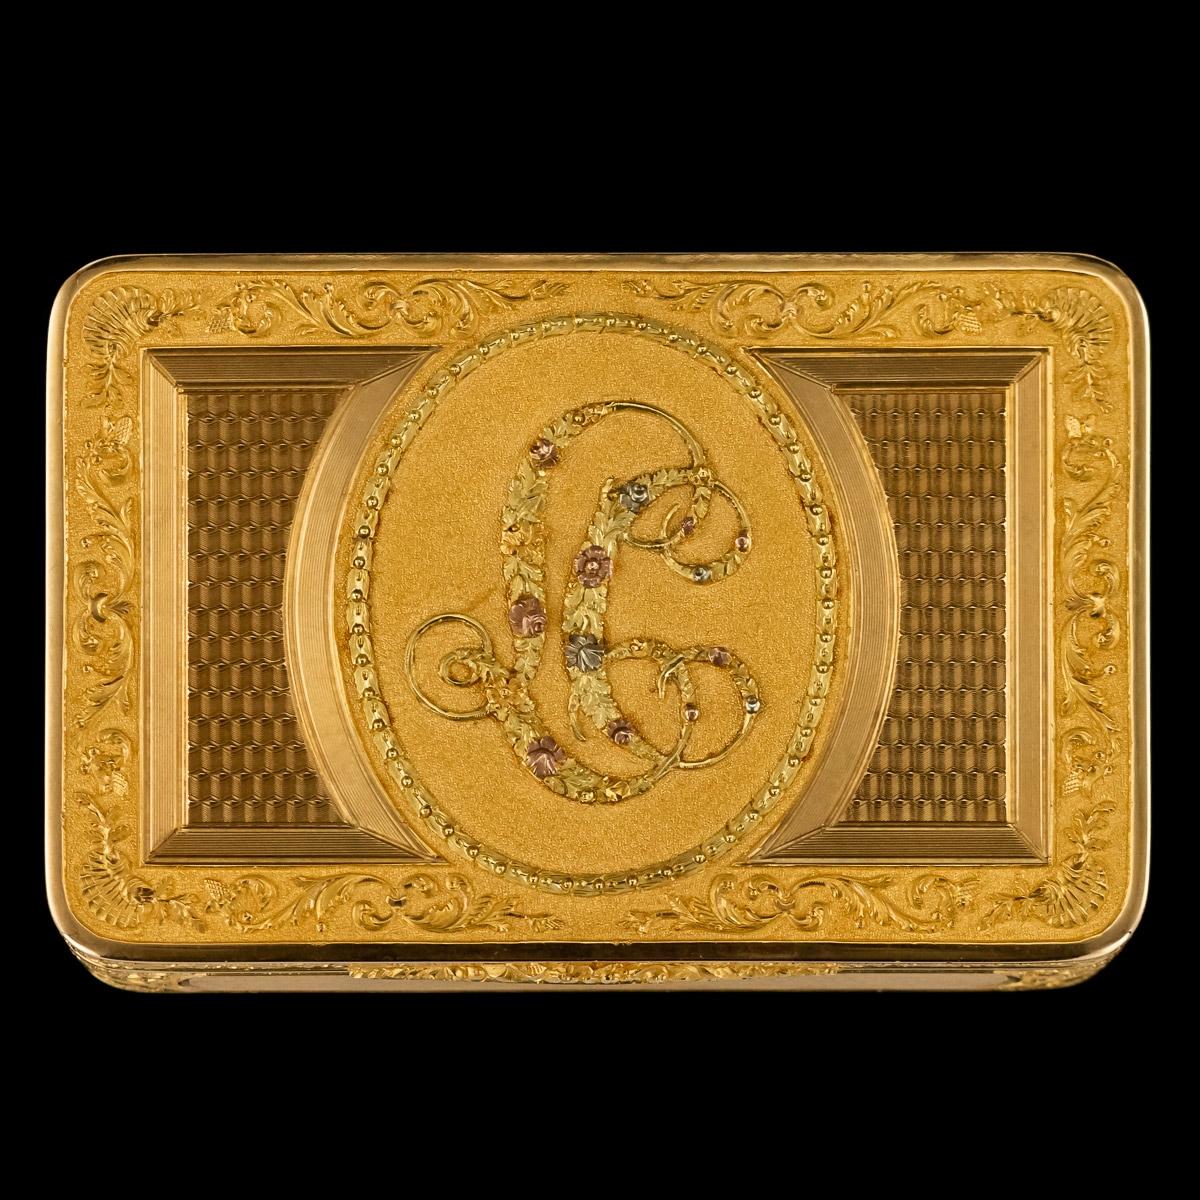 Antique early 19th century Austrian exceptional four-color 18 karat gold snuff box, of rectangular form with rounded corners, the hinged covers beautifully engraved with shell and scroll decoration, engine turning in reserves and applied with an